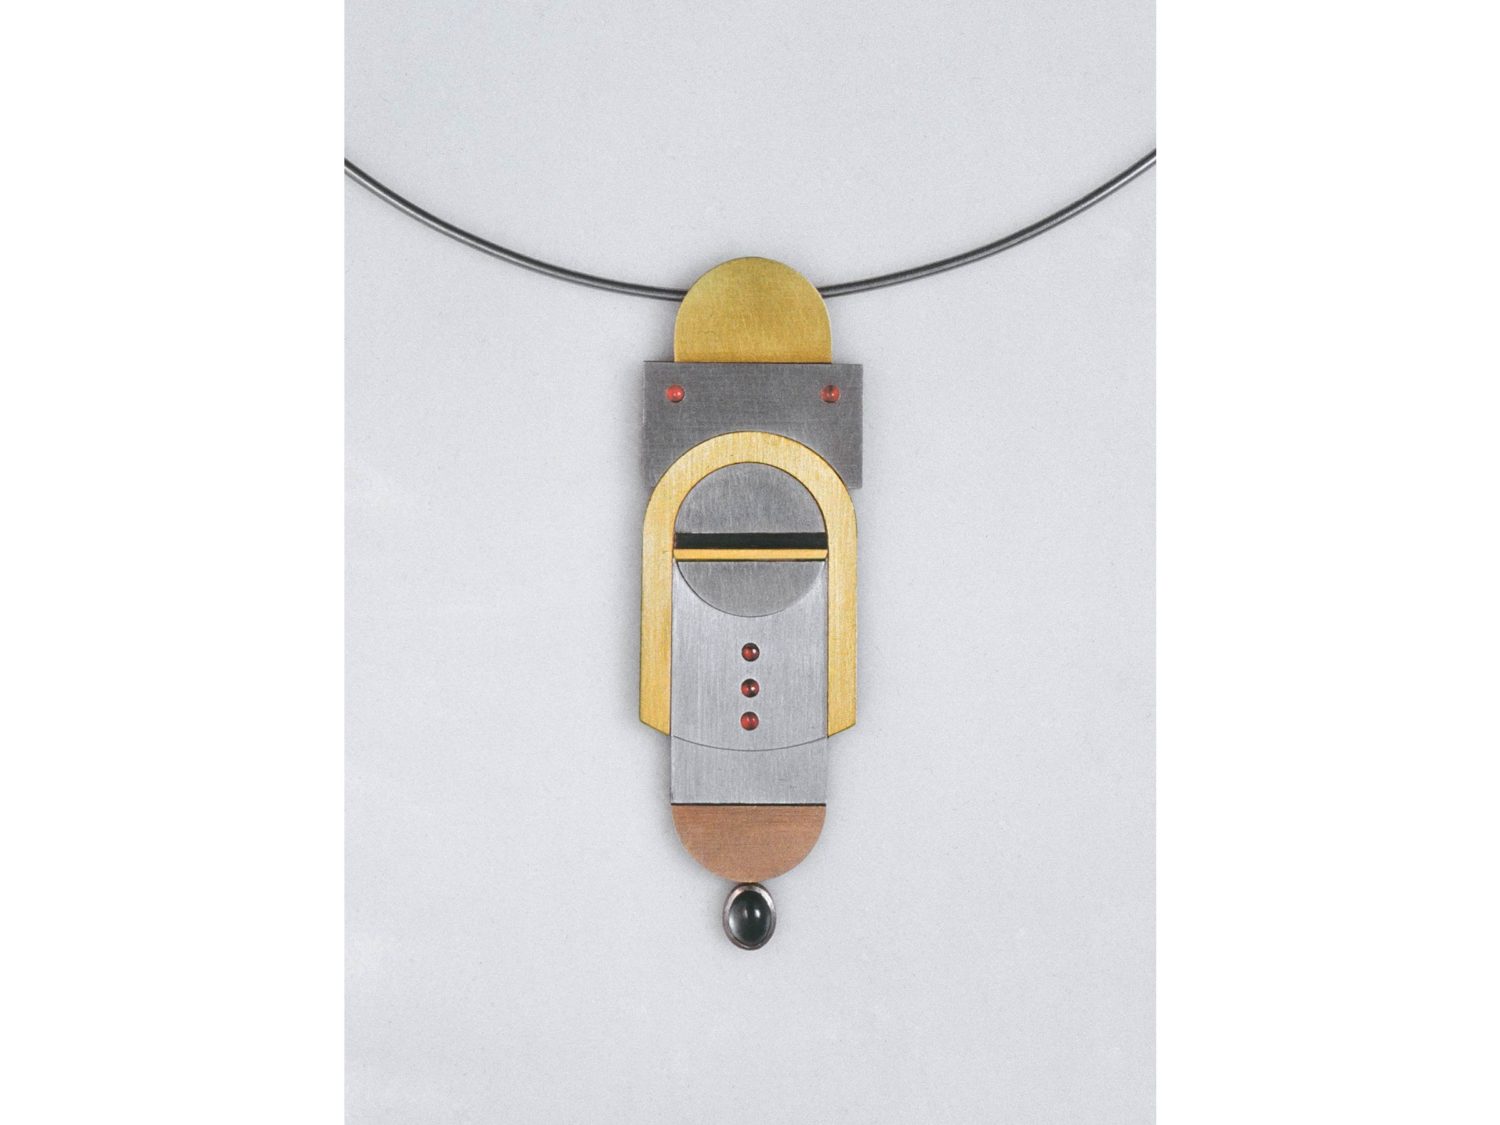 pendant, gold, white gold, stainless steel, silver, copper, rubies, sapphire, 1975/76